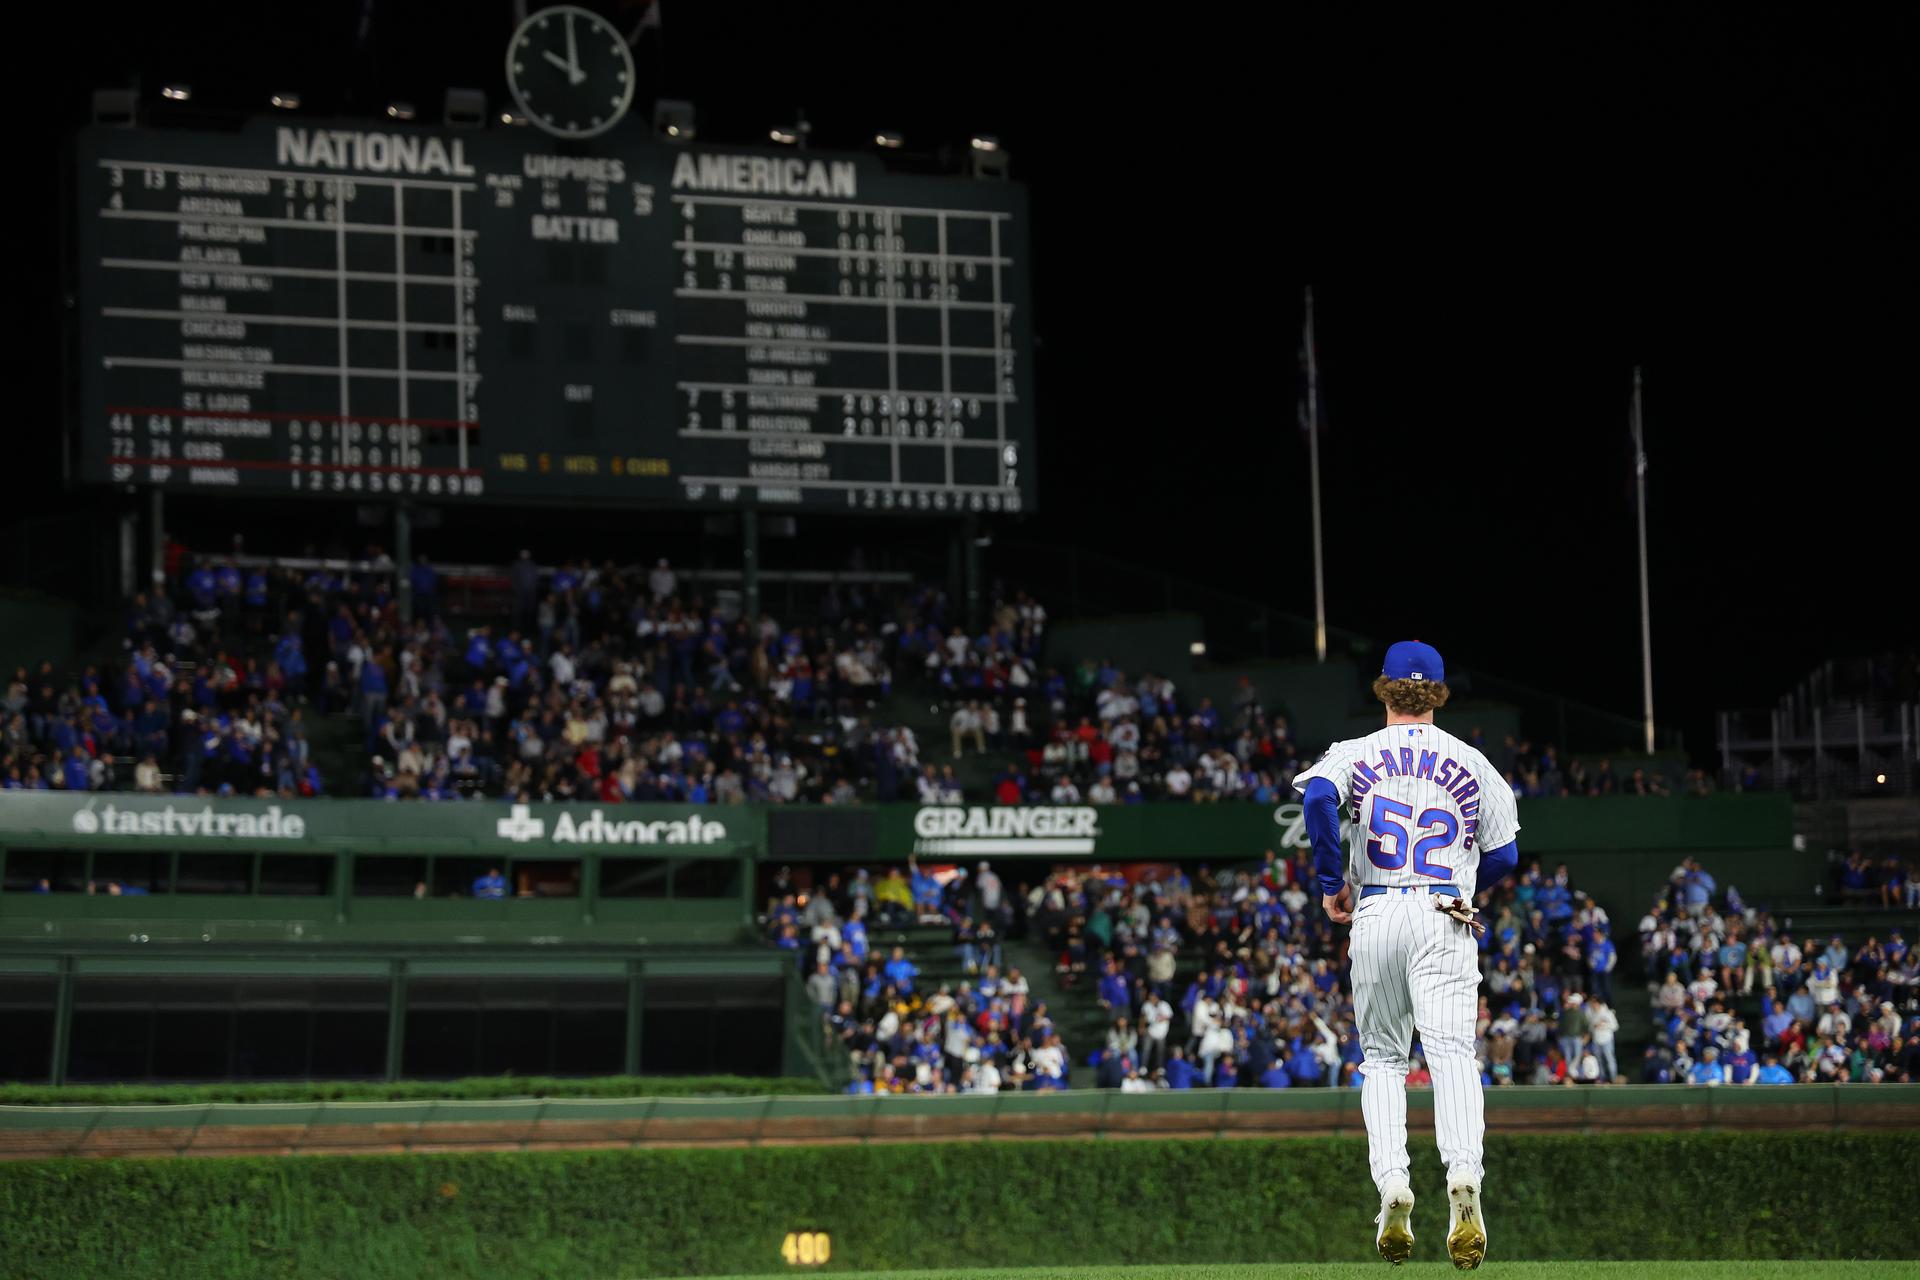 Pete Crow-Armstrong runs out to center field at Wrigley